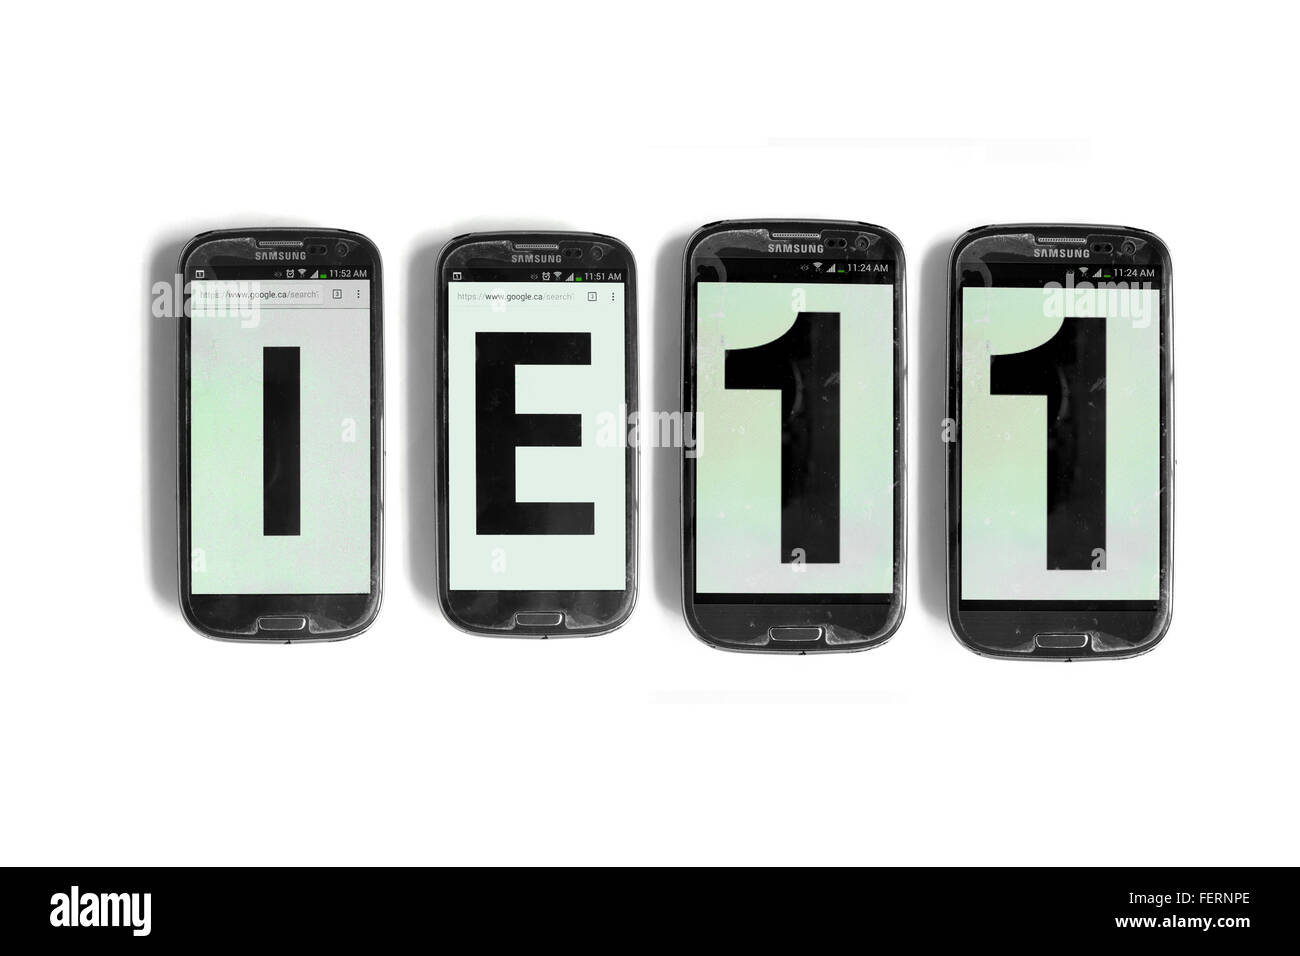 IE11 on the screens of smartphones photographed against a white background. Stock Photo